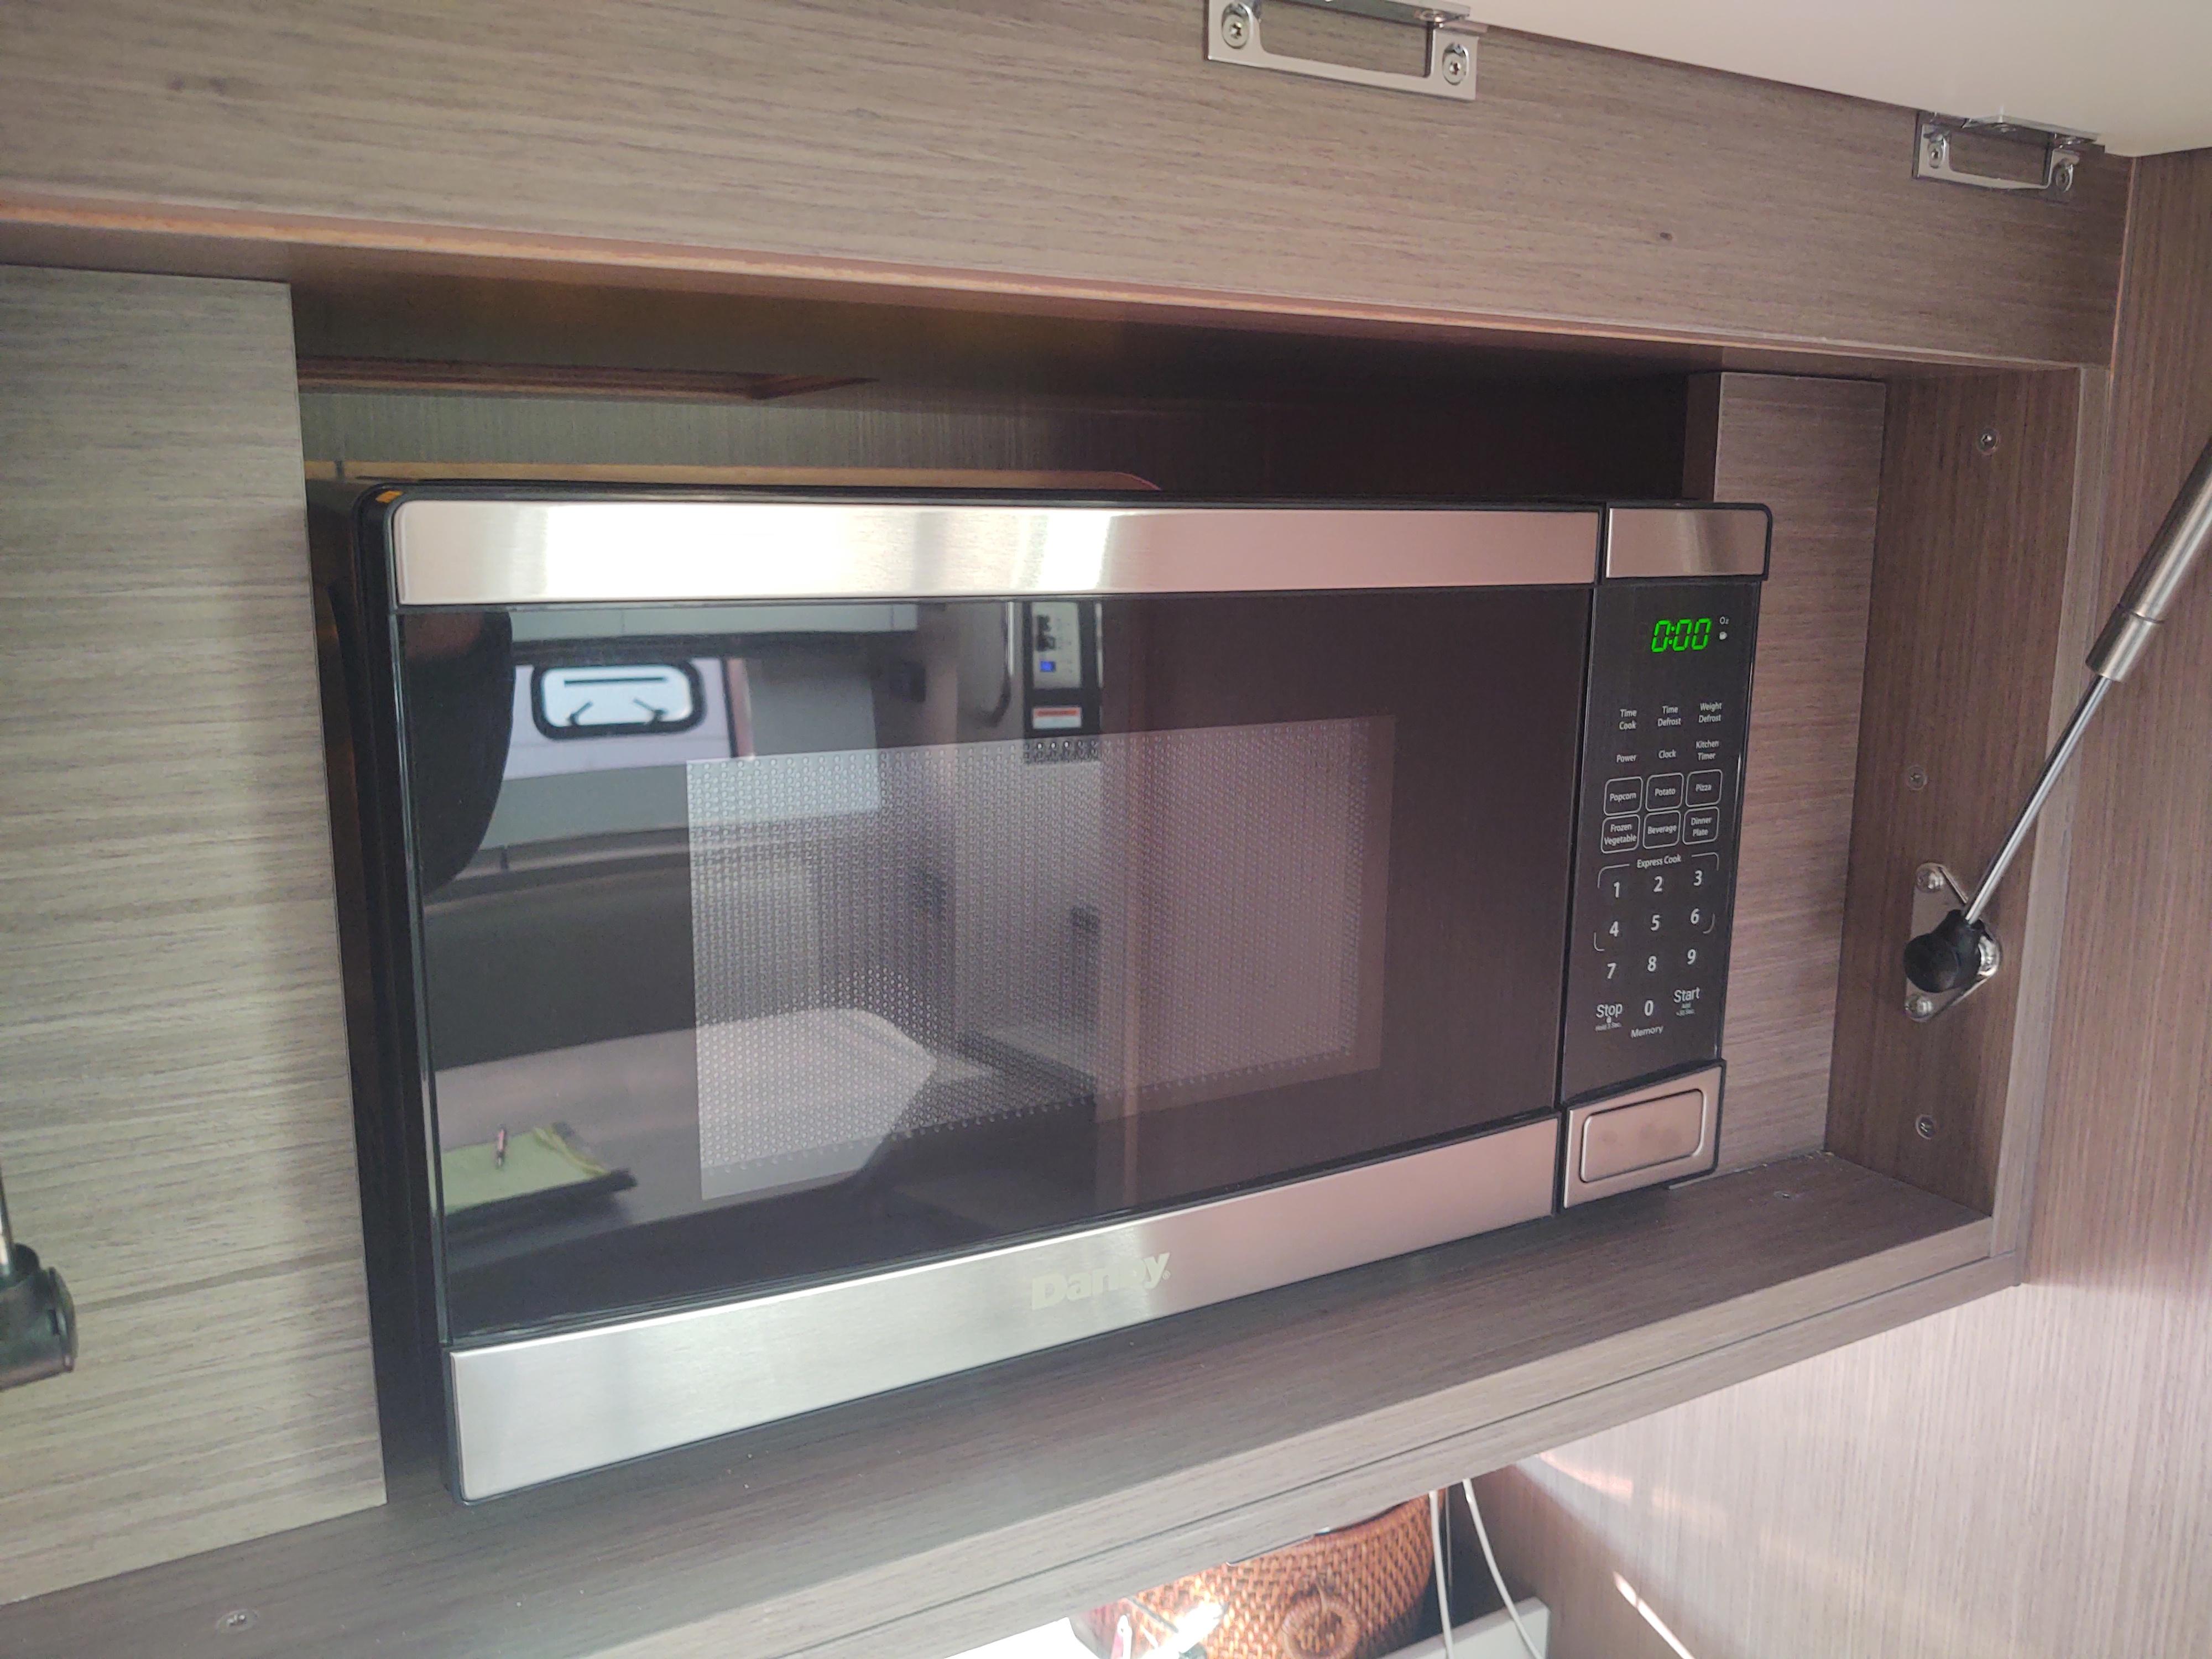 GT 41 Microwave oven